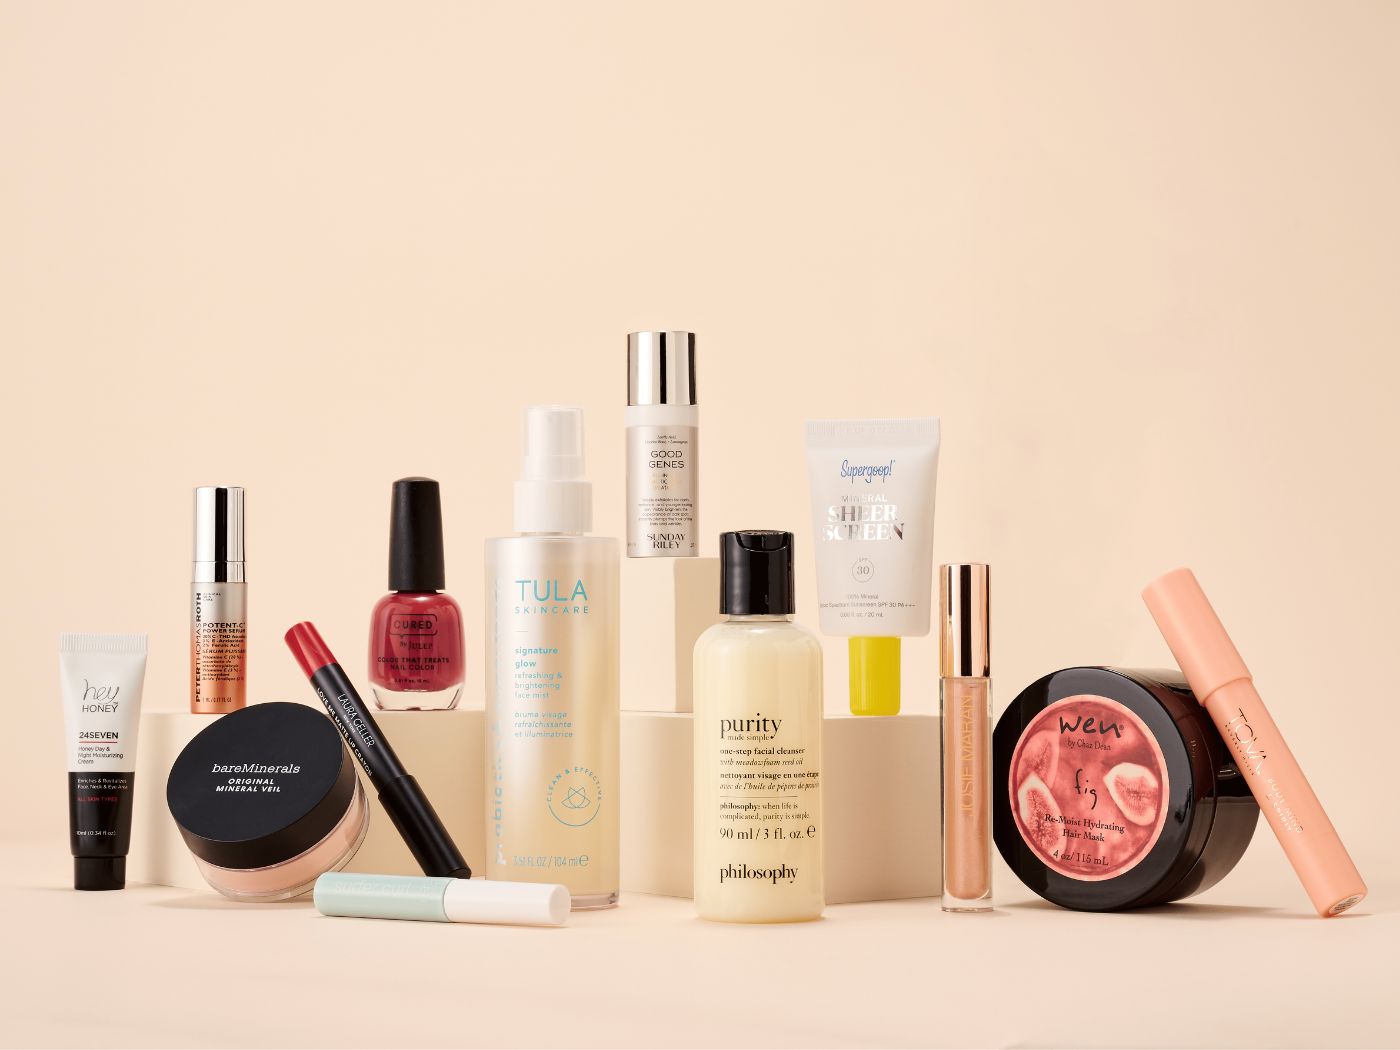 Display of various beauty products on a neutral background